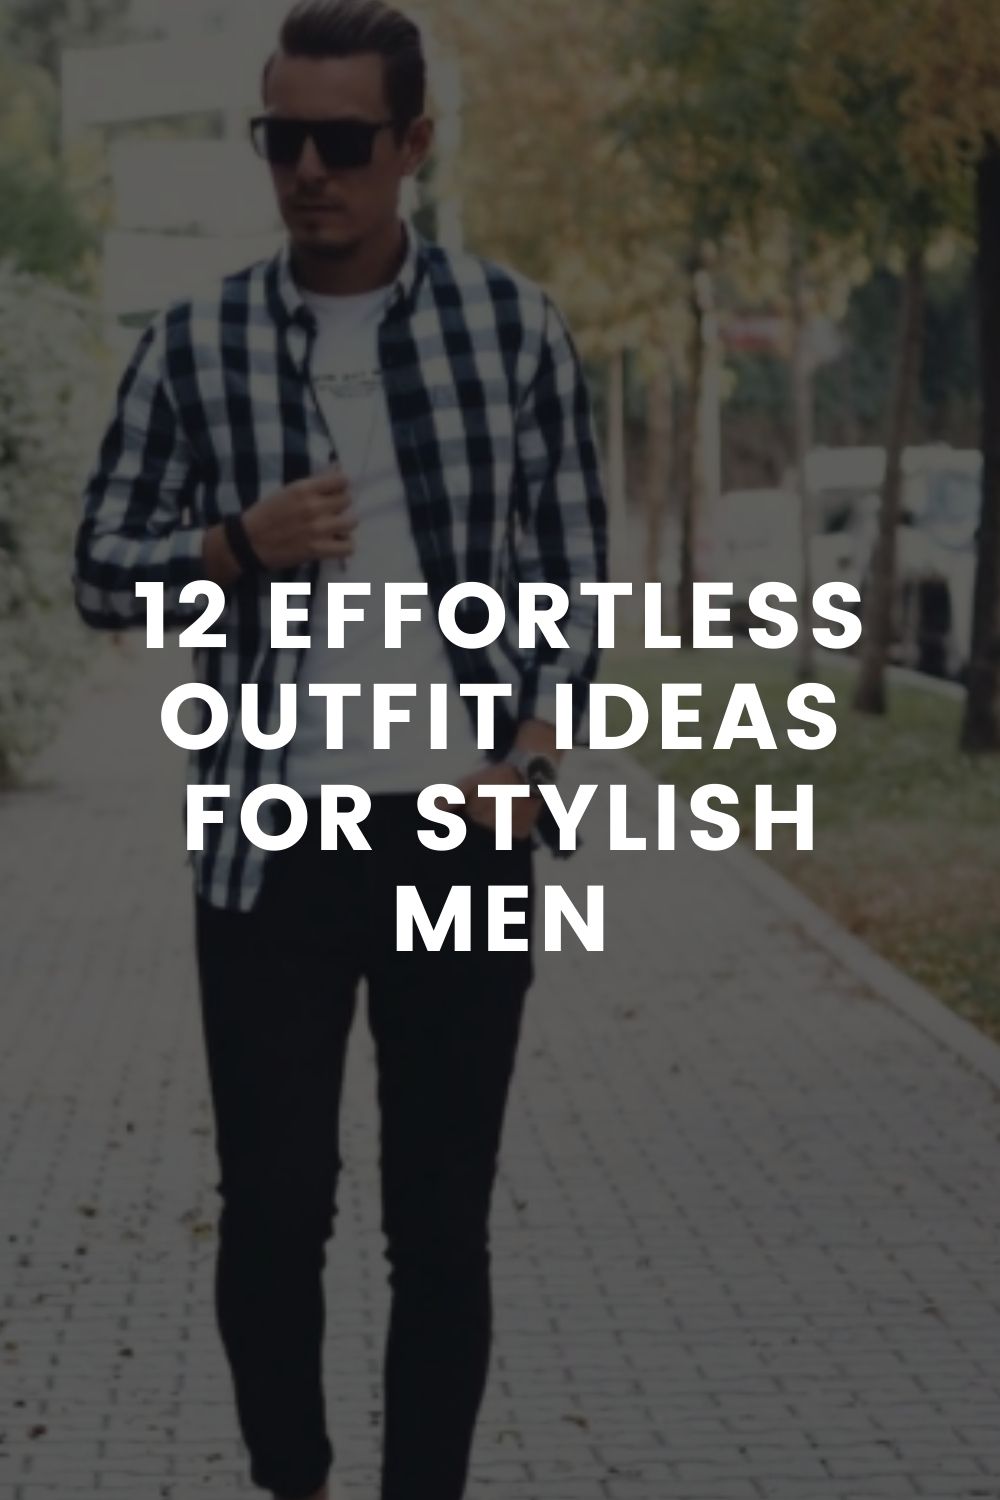 12 Effortless Outfit Ideas For Stylish Men